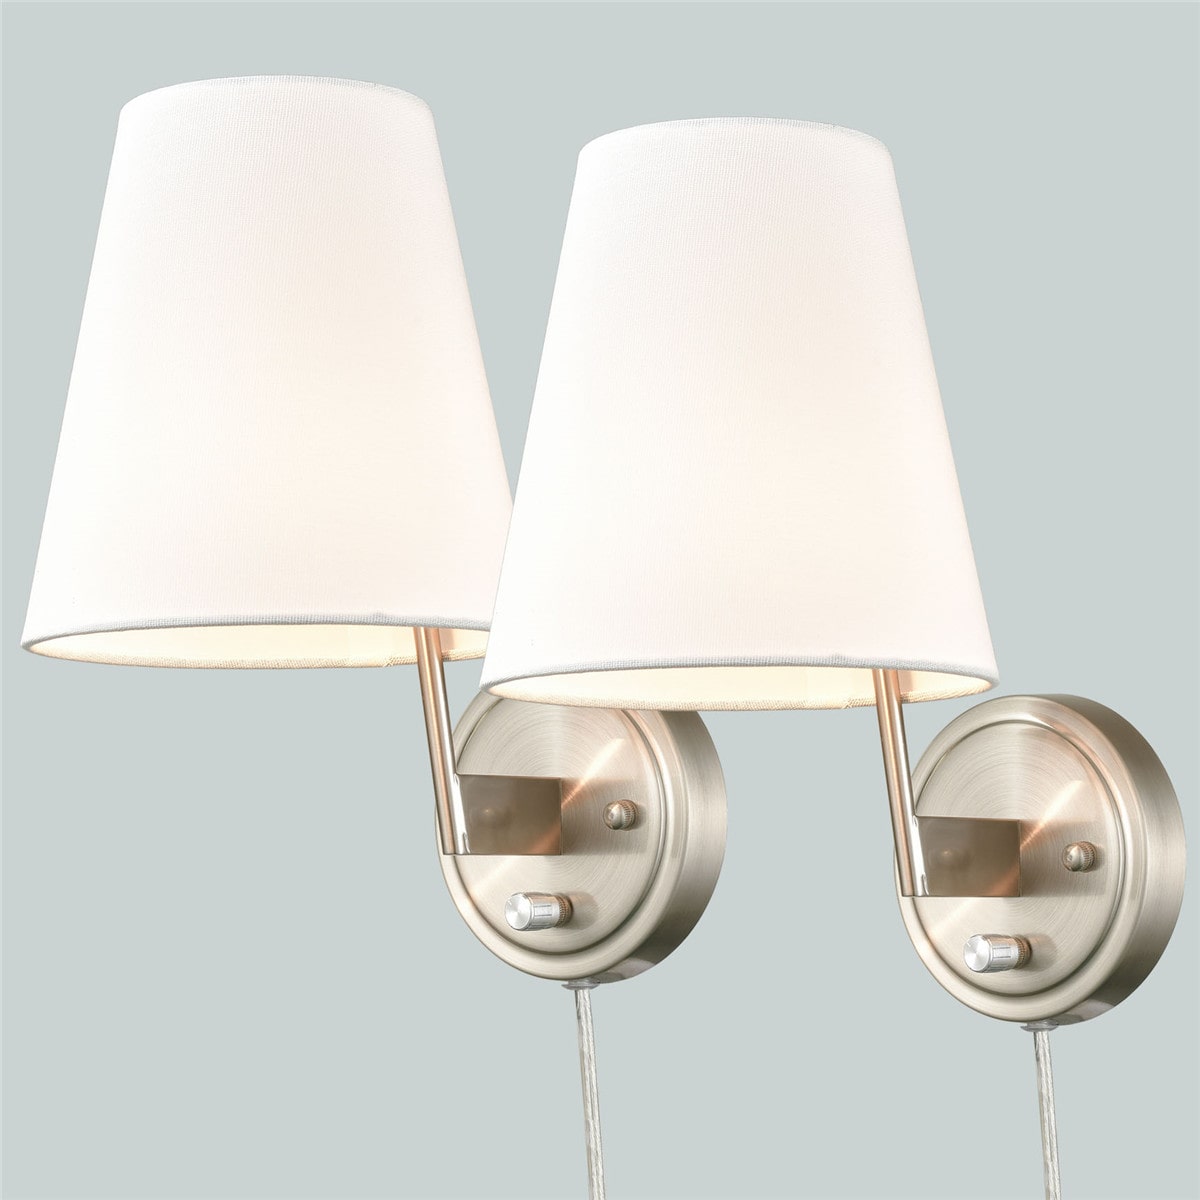 Modern Fabric Plug-in Wall Lamps Set of 2, Brushed Nickel